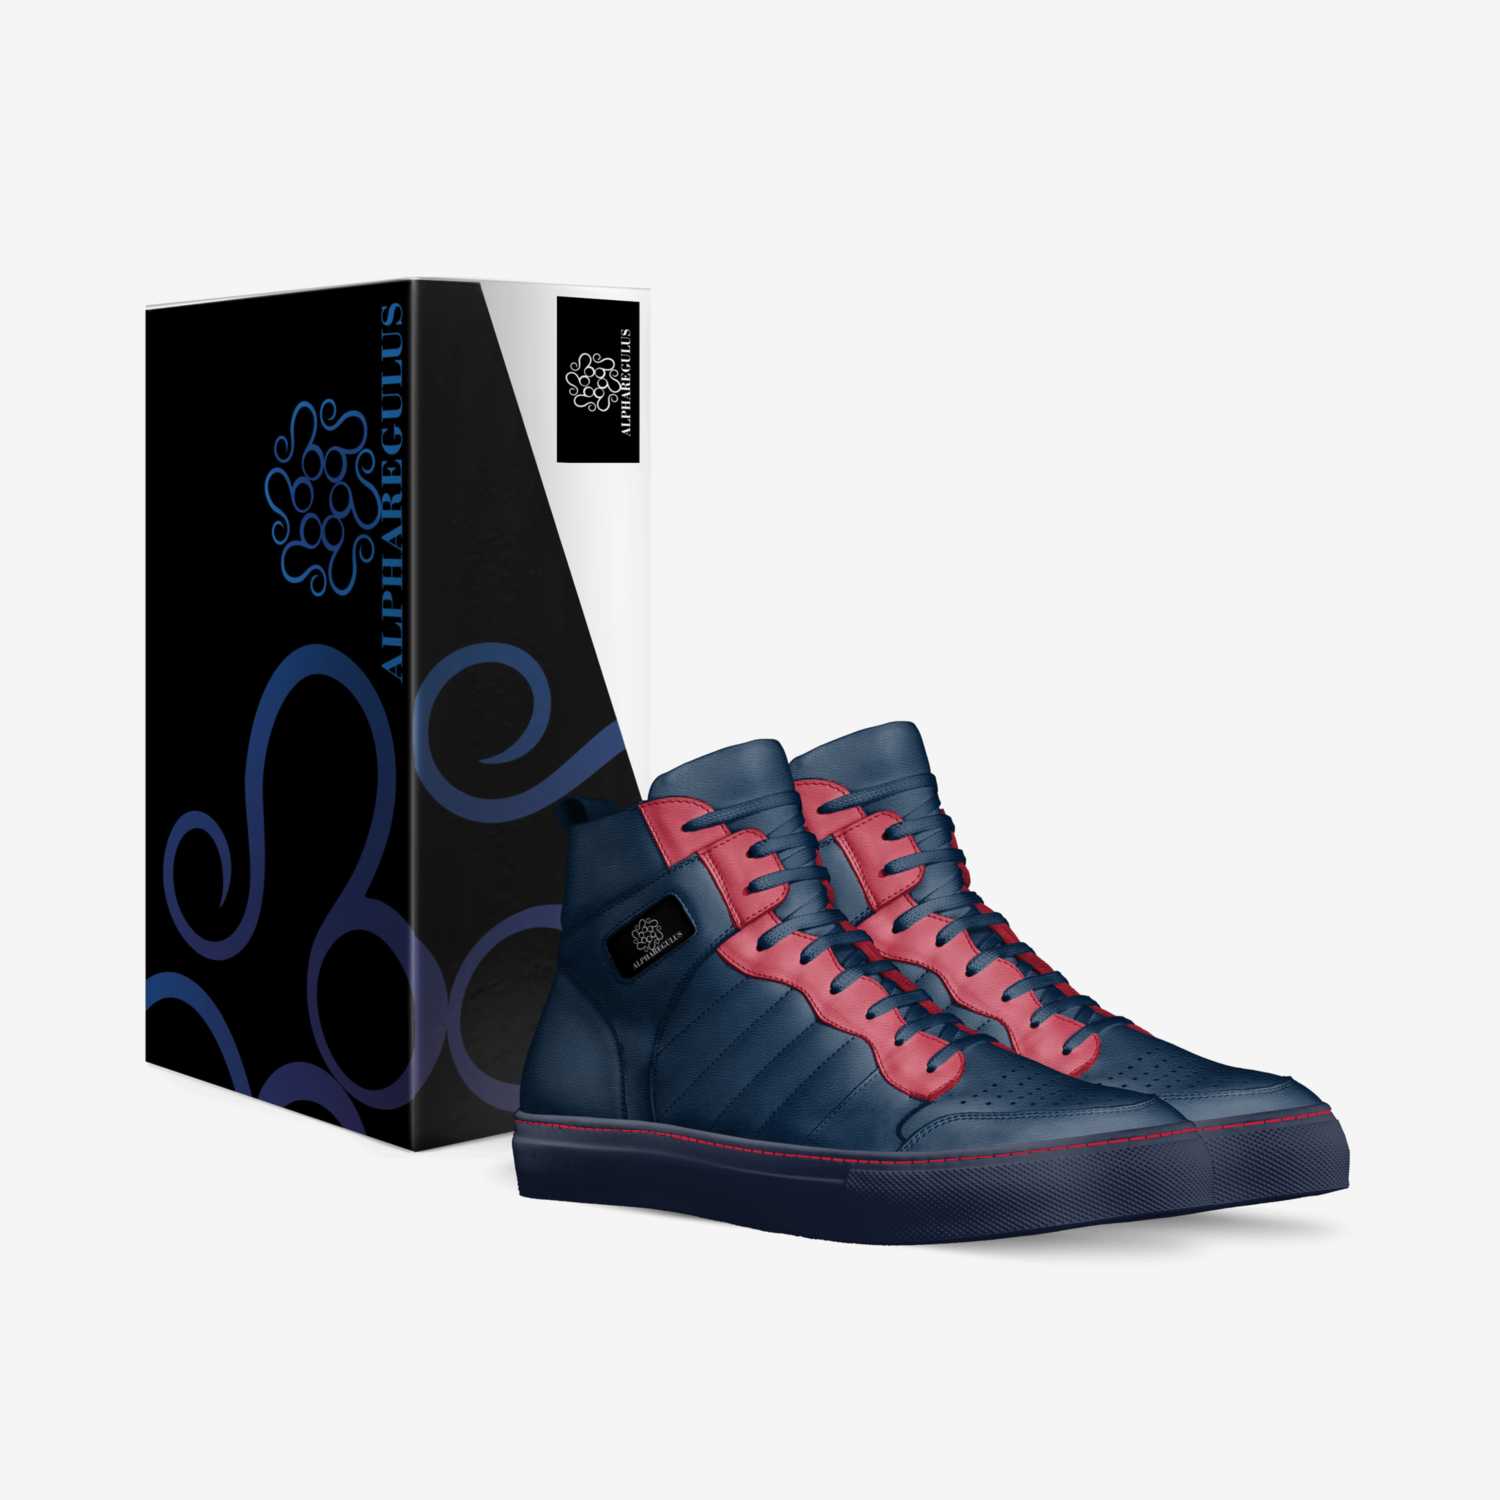 Alpharegulus custom made in Italy shoes by Francisco Rivero | Box view